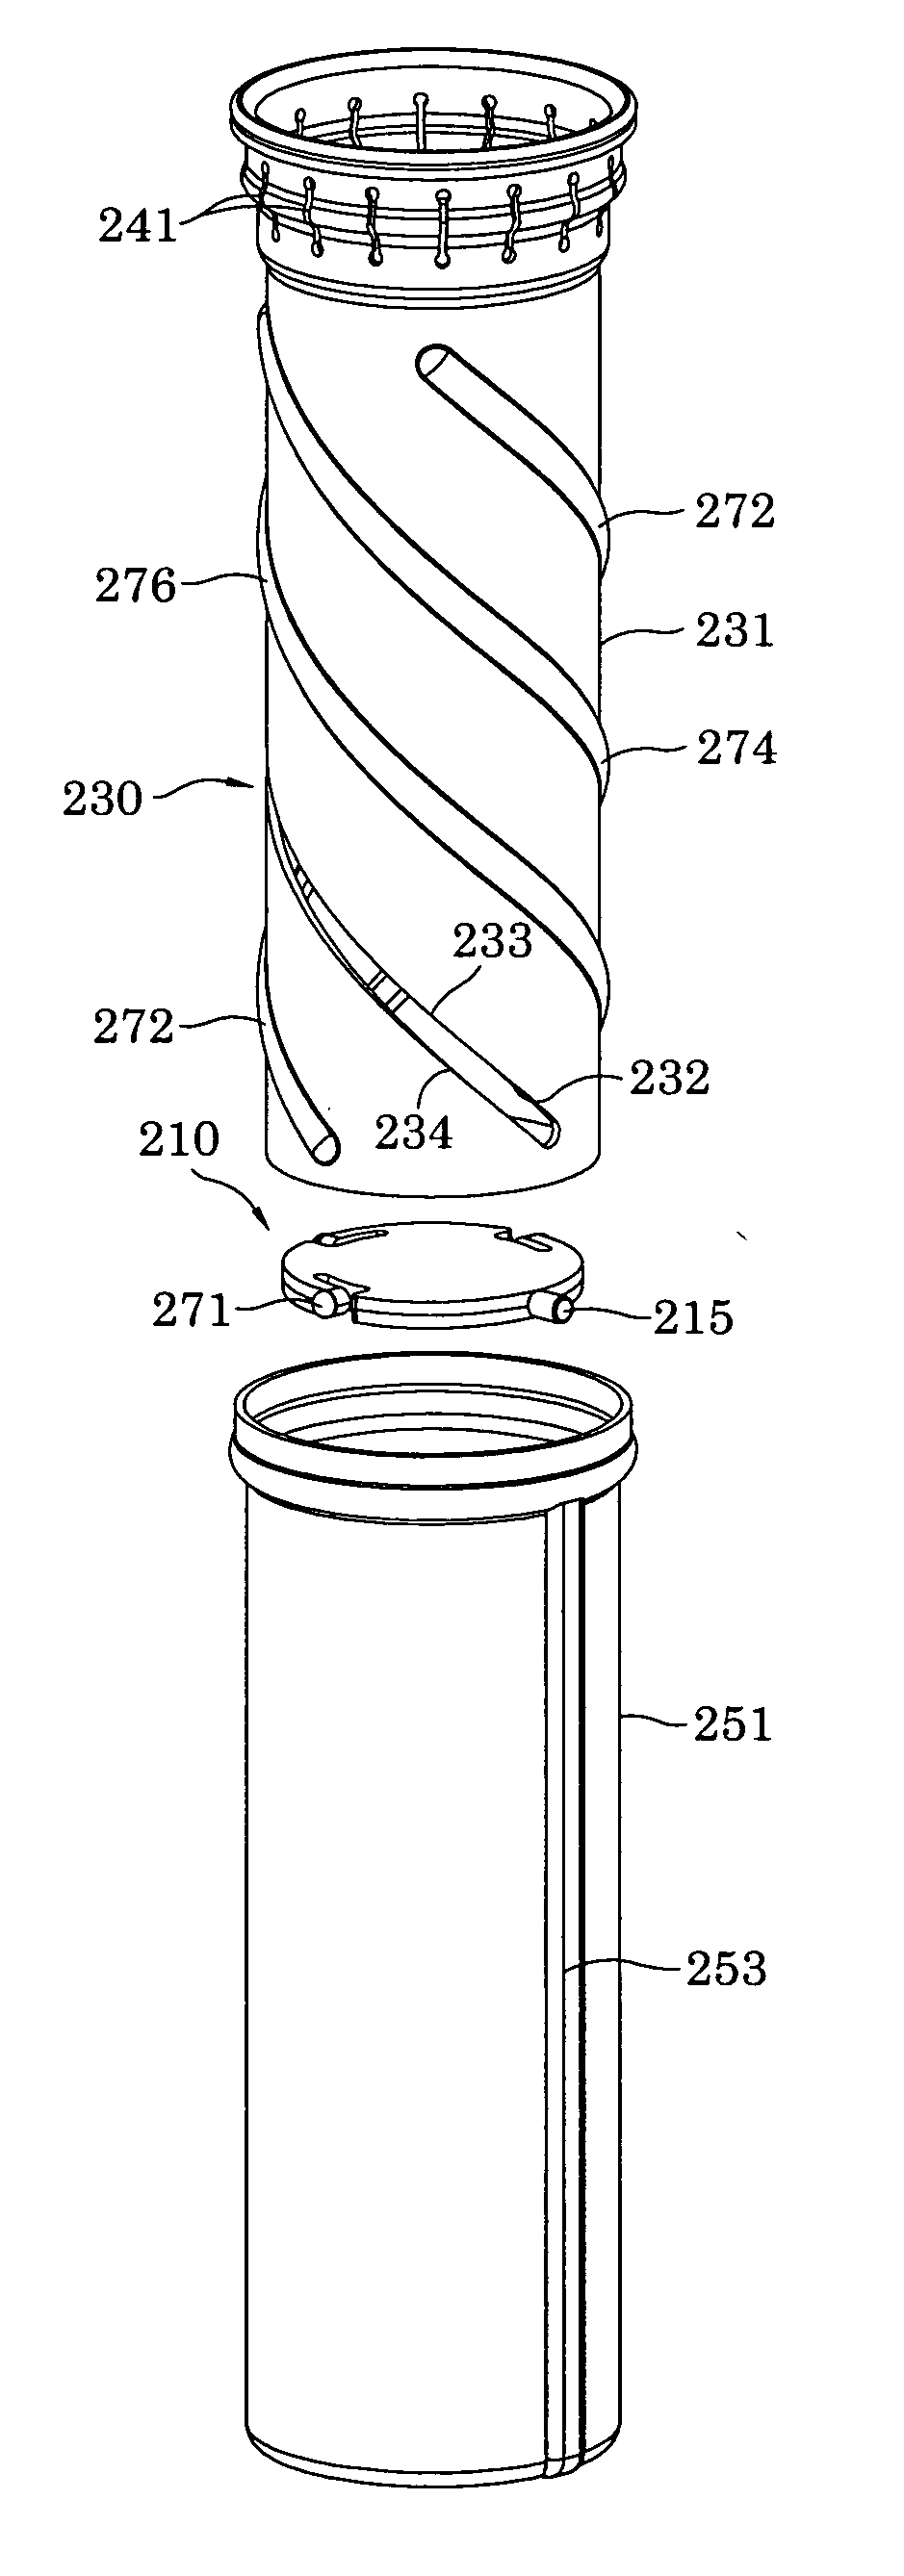 Elevating lift dispenser and container for foodstuffs